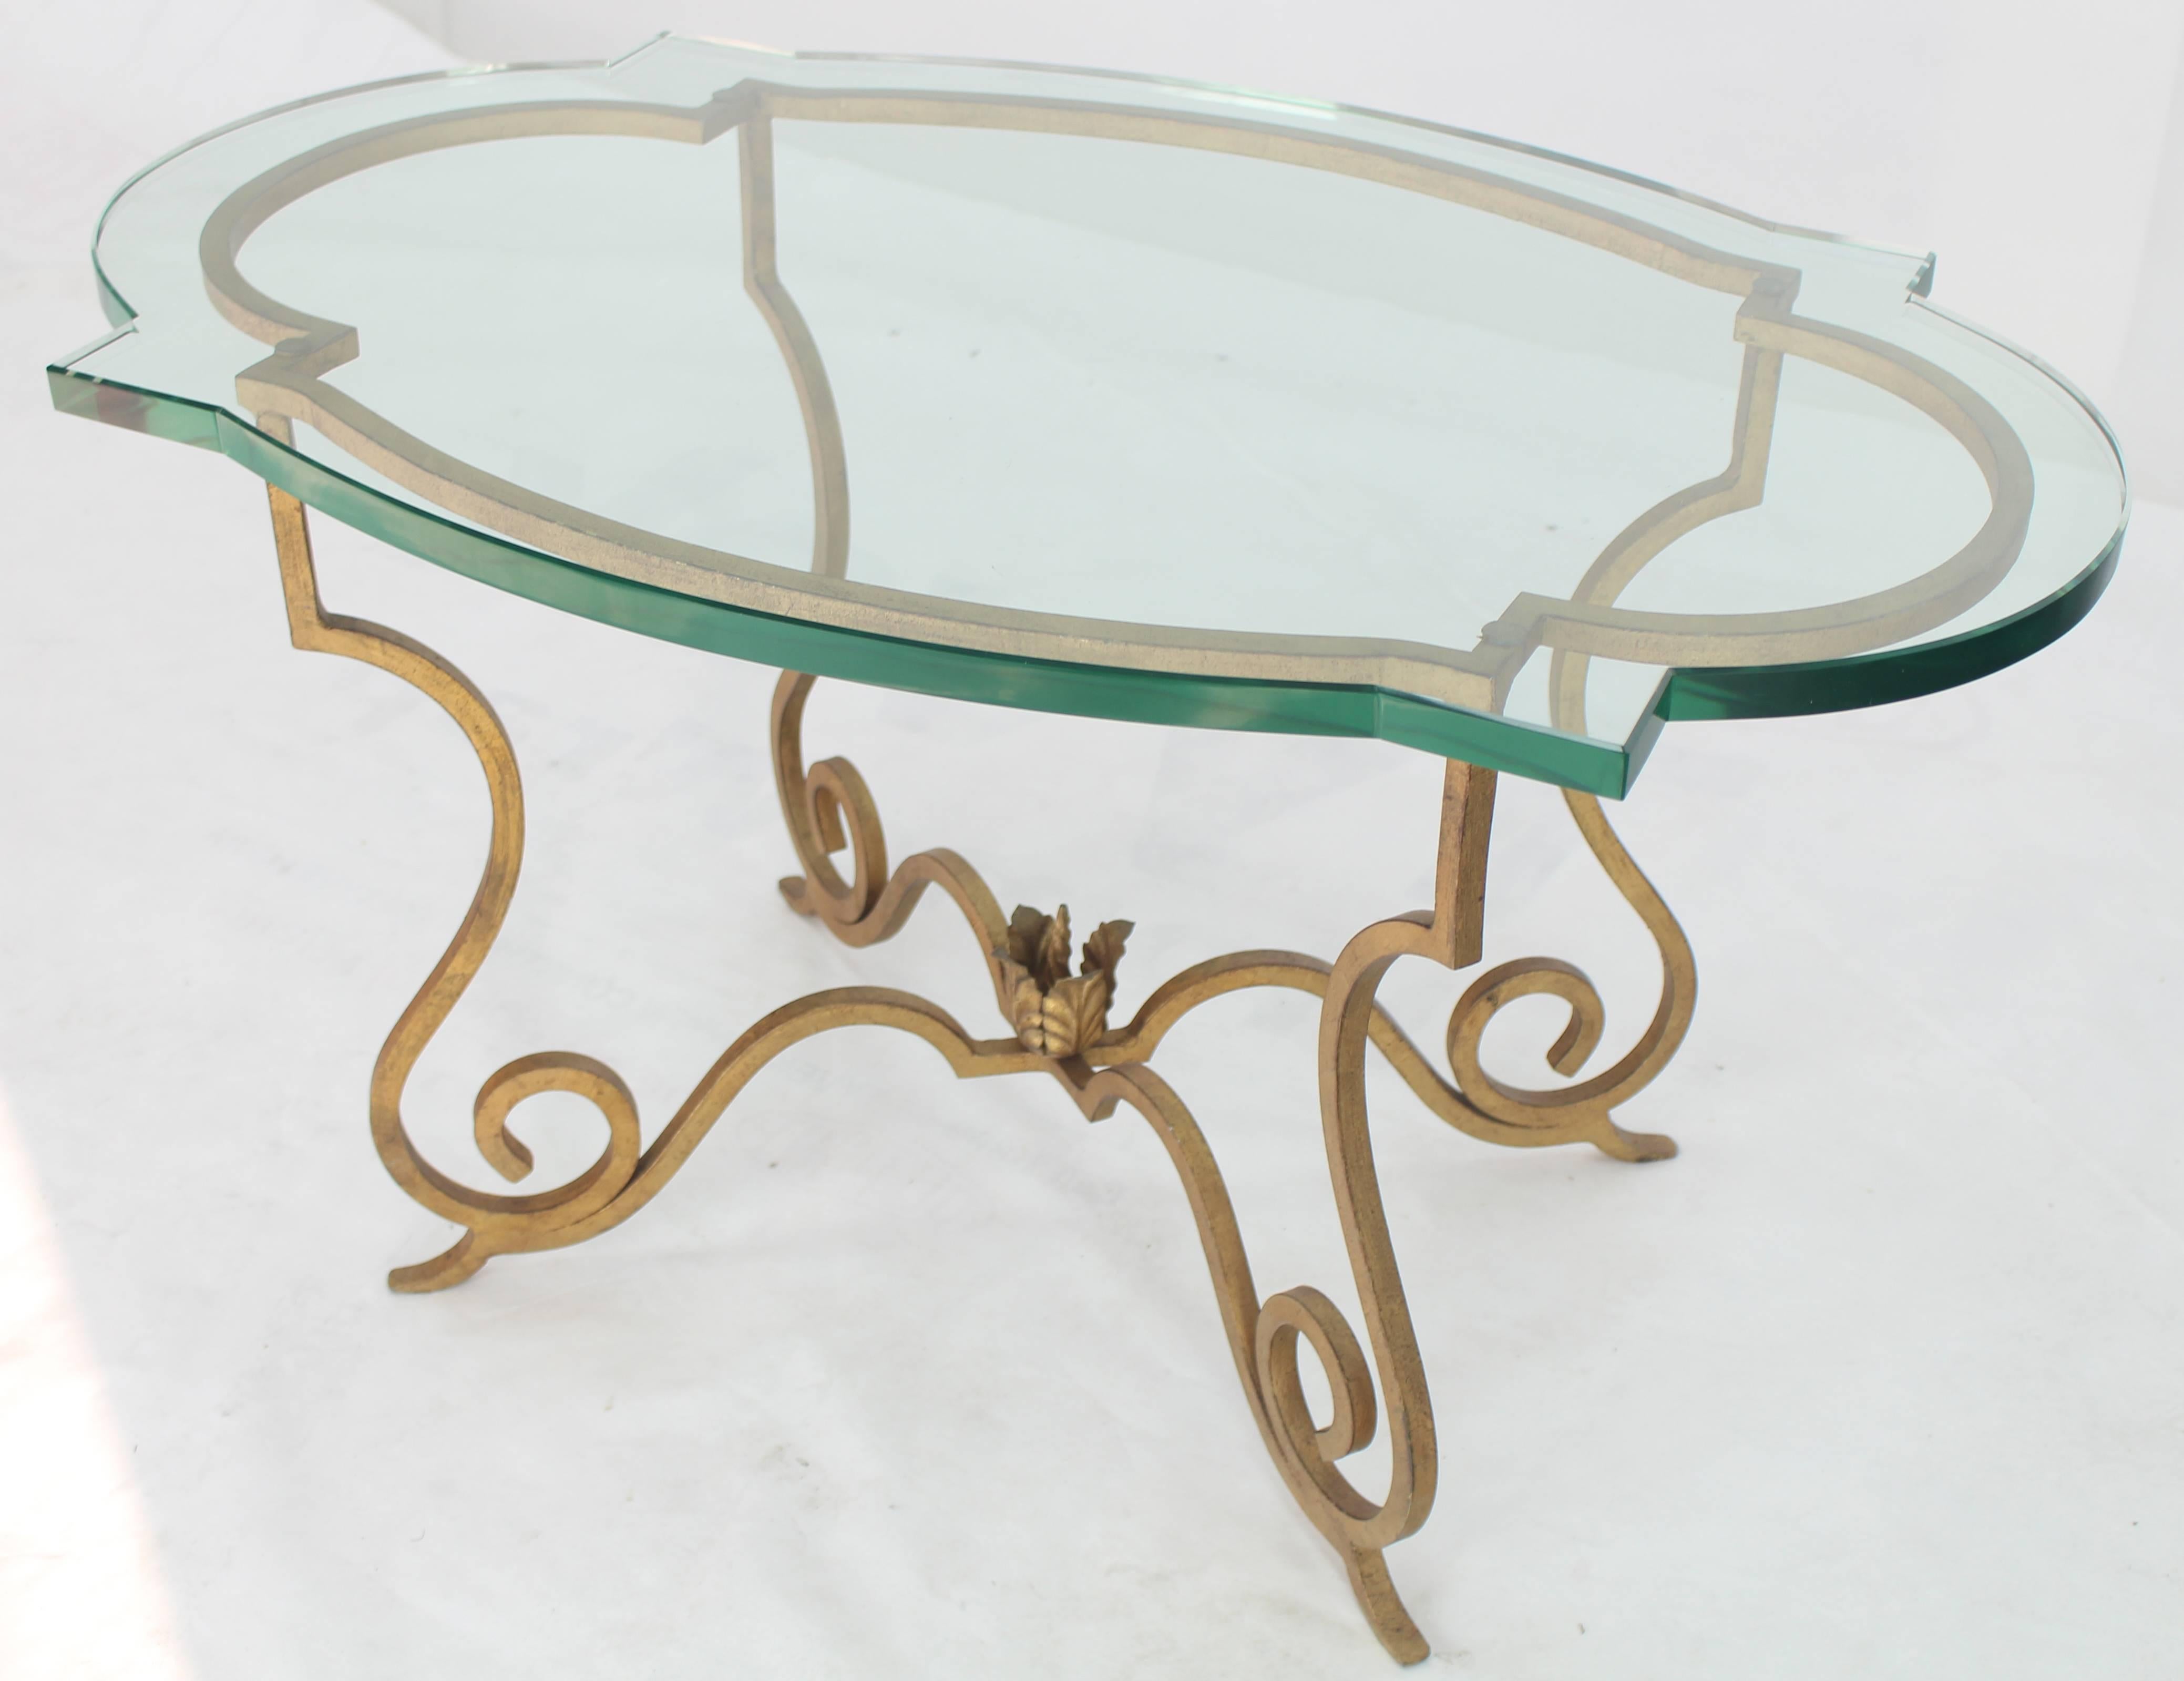 Forged Gold Gilt Iron Base Figural Glass Oval Side Occasional Table In Excellent Condition For Sale In Rockaway, NJ